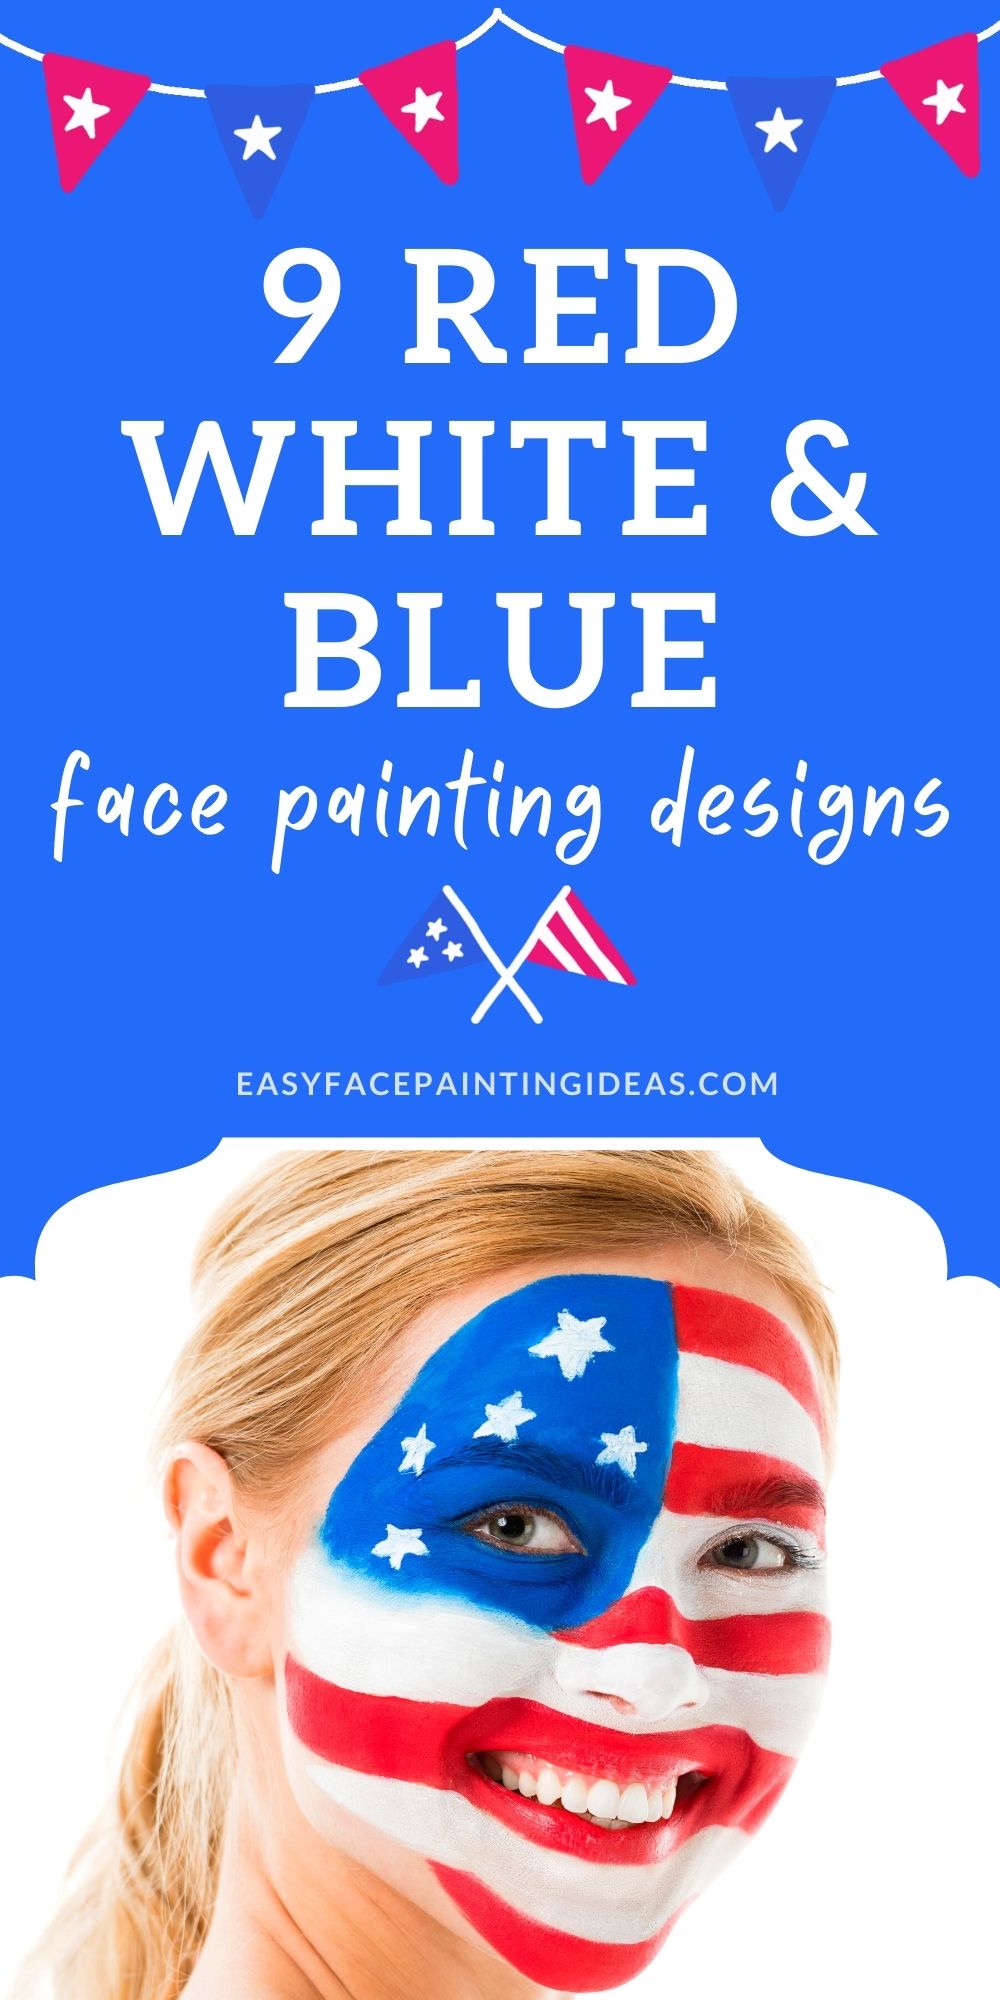 a photo shows a woman with 4th of july makeup face painted on her. An overlay reads, "9 red white and blue face painting designs"